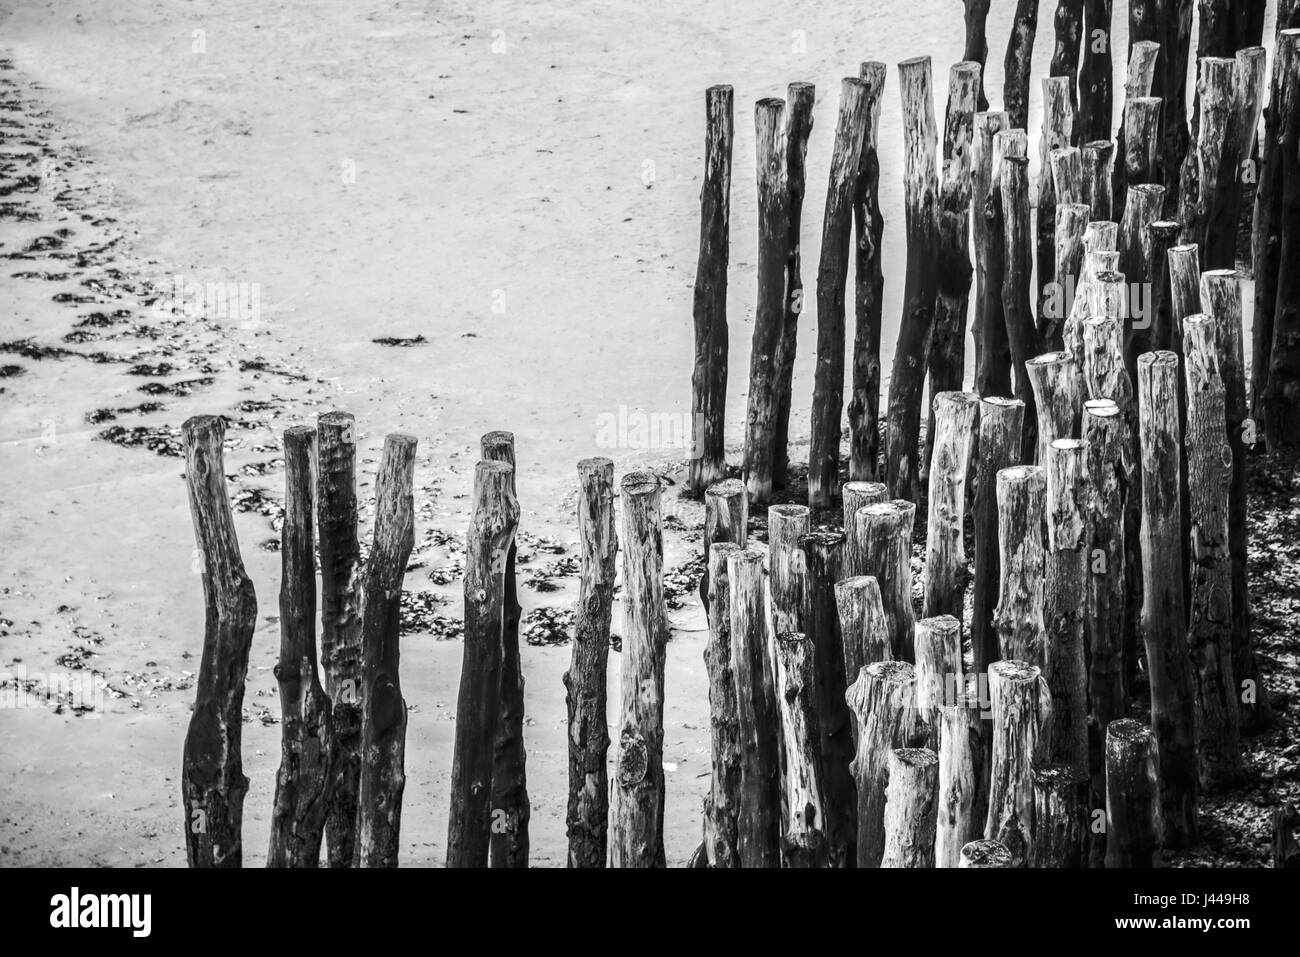 Wood piles at low tide on the beach of Saint Malo, France Stock Photo